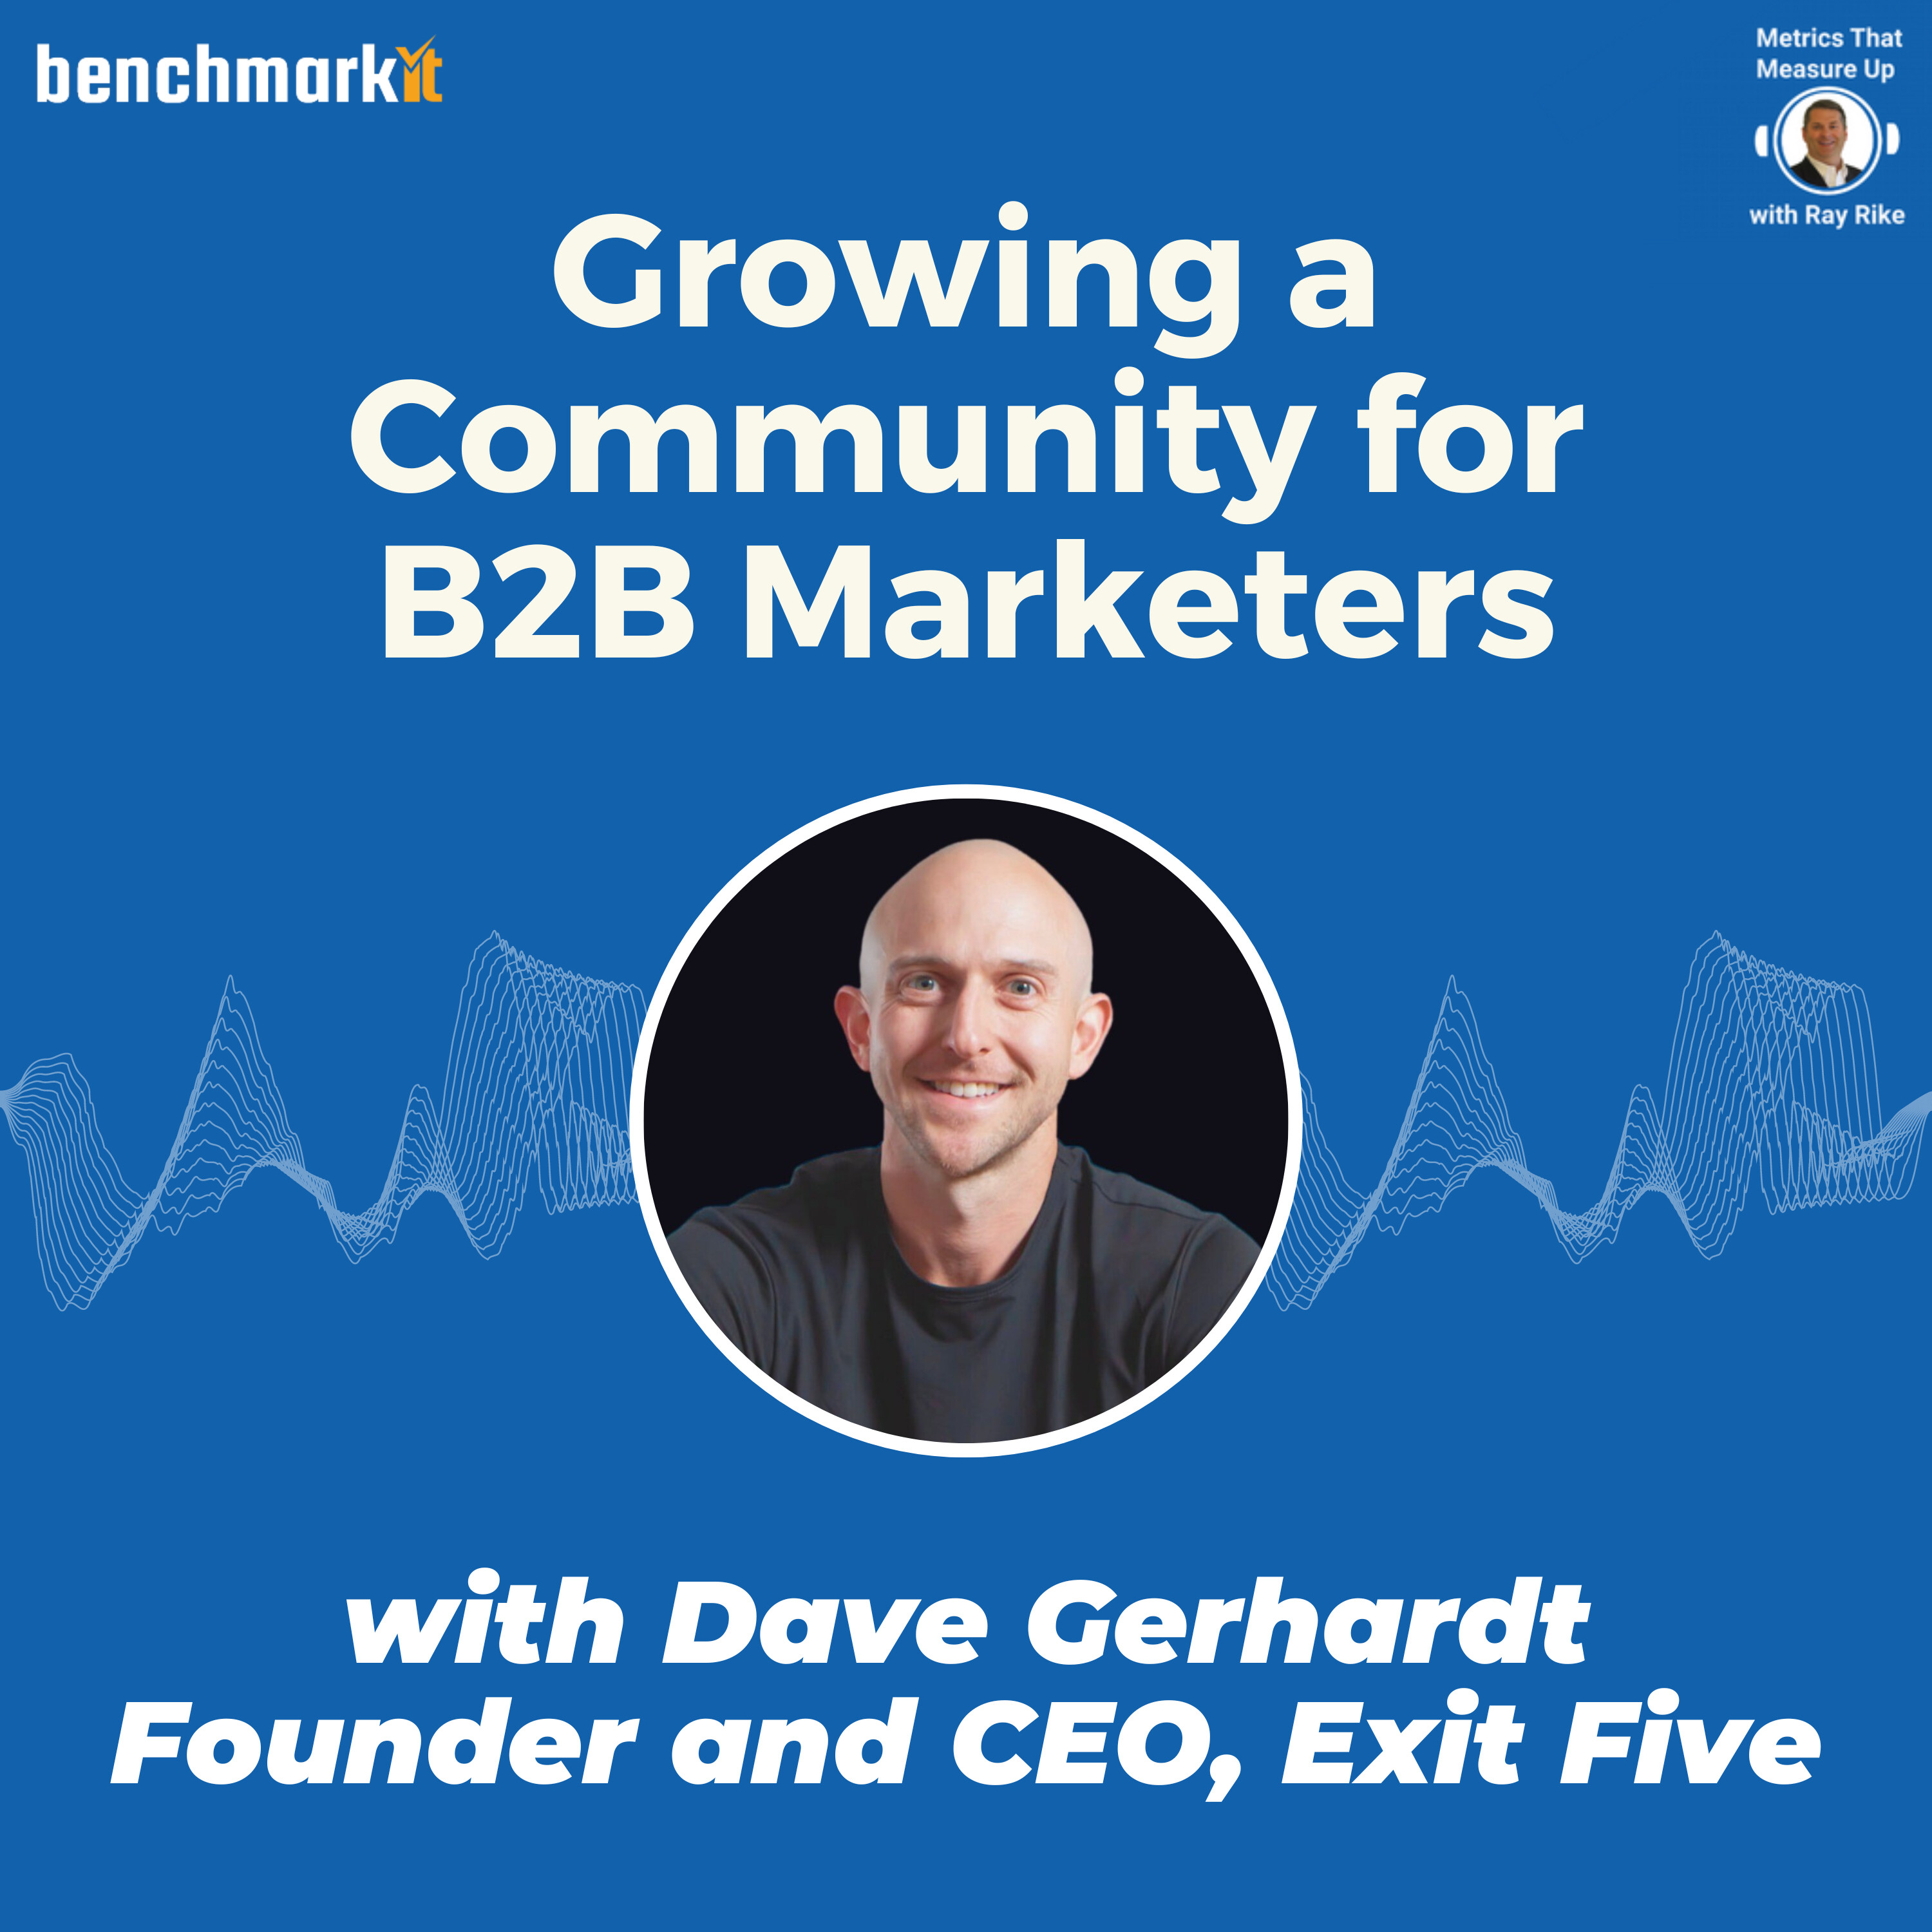 Building a Community for B2B Marketers - with Dave Gerhardt, Founder and CEO Exit Five